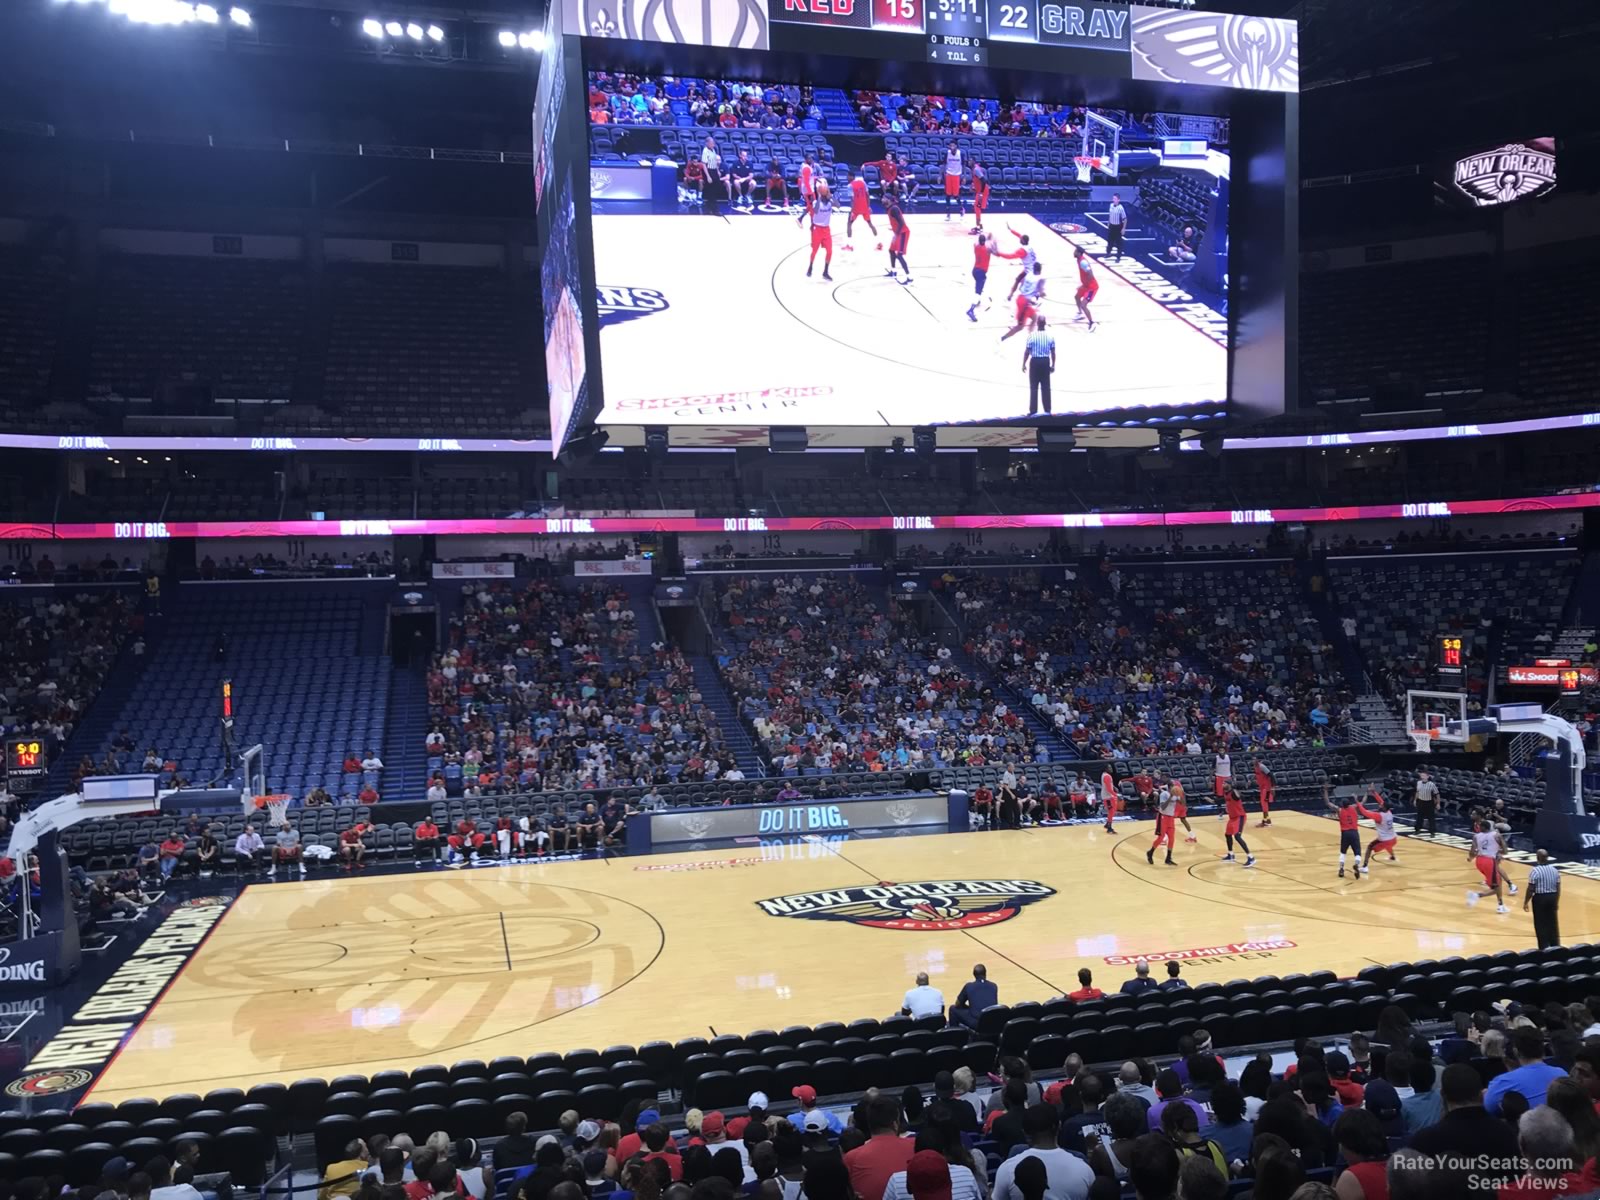 section 101, row 20 seat view  for basketball - smoothie king center